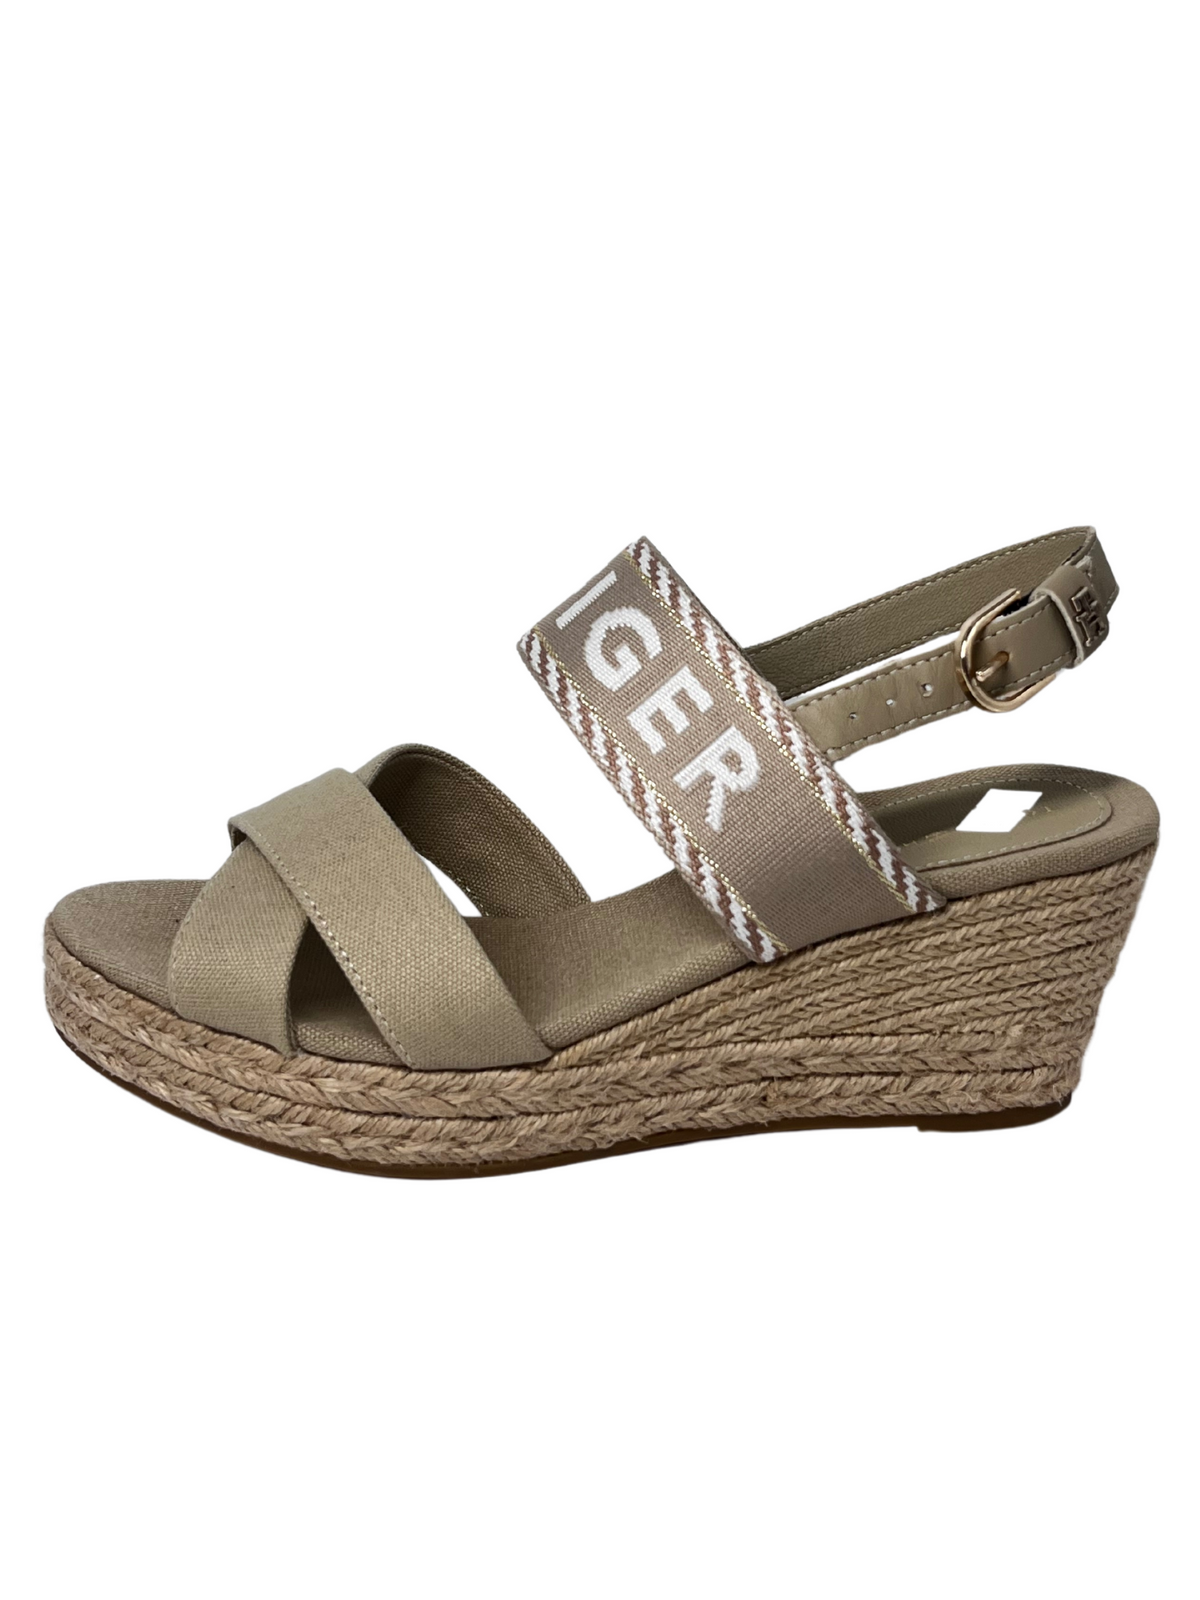 Tommy Hilfiger Taupe Wedge Sandals